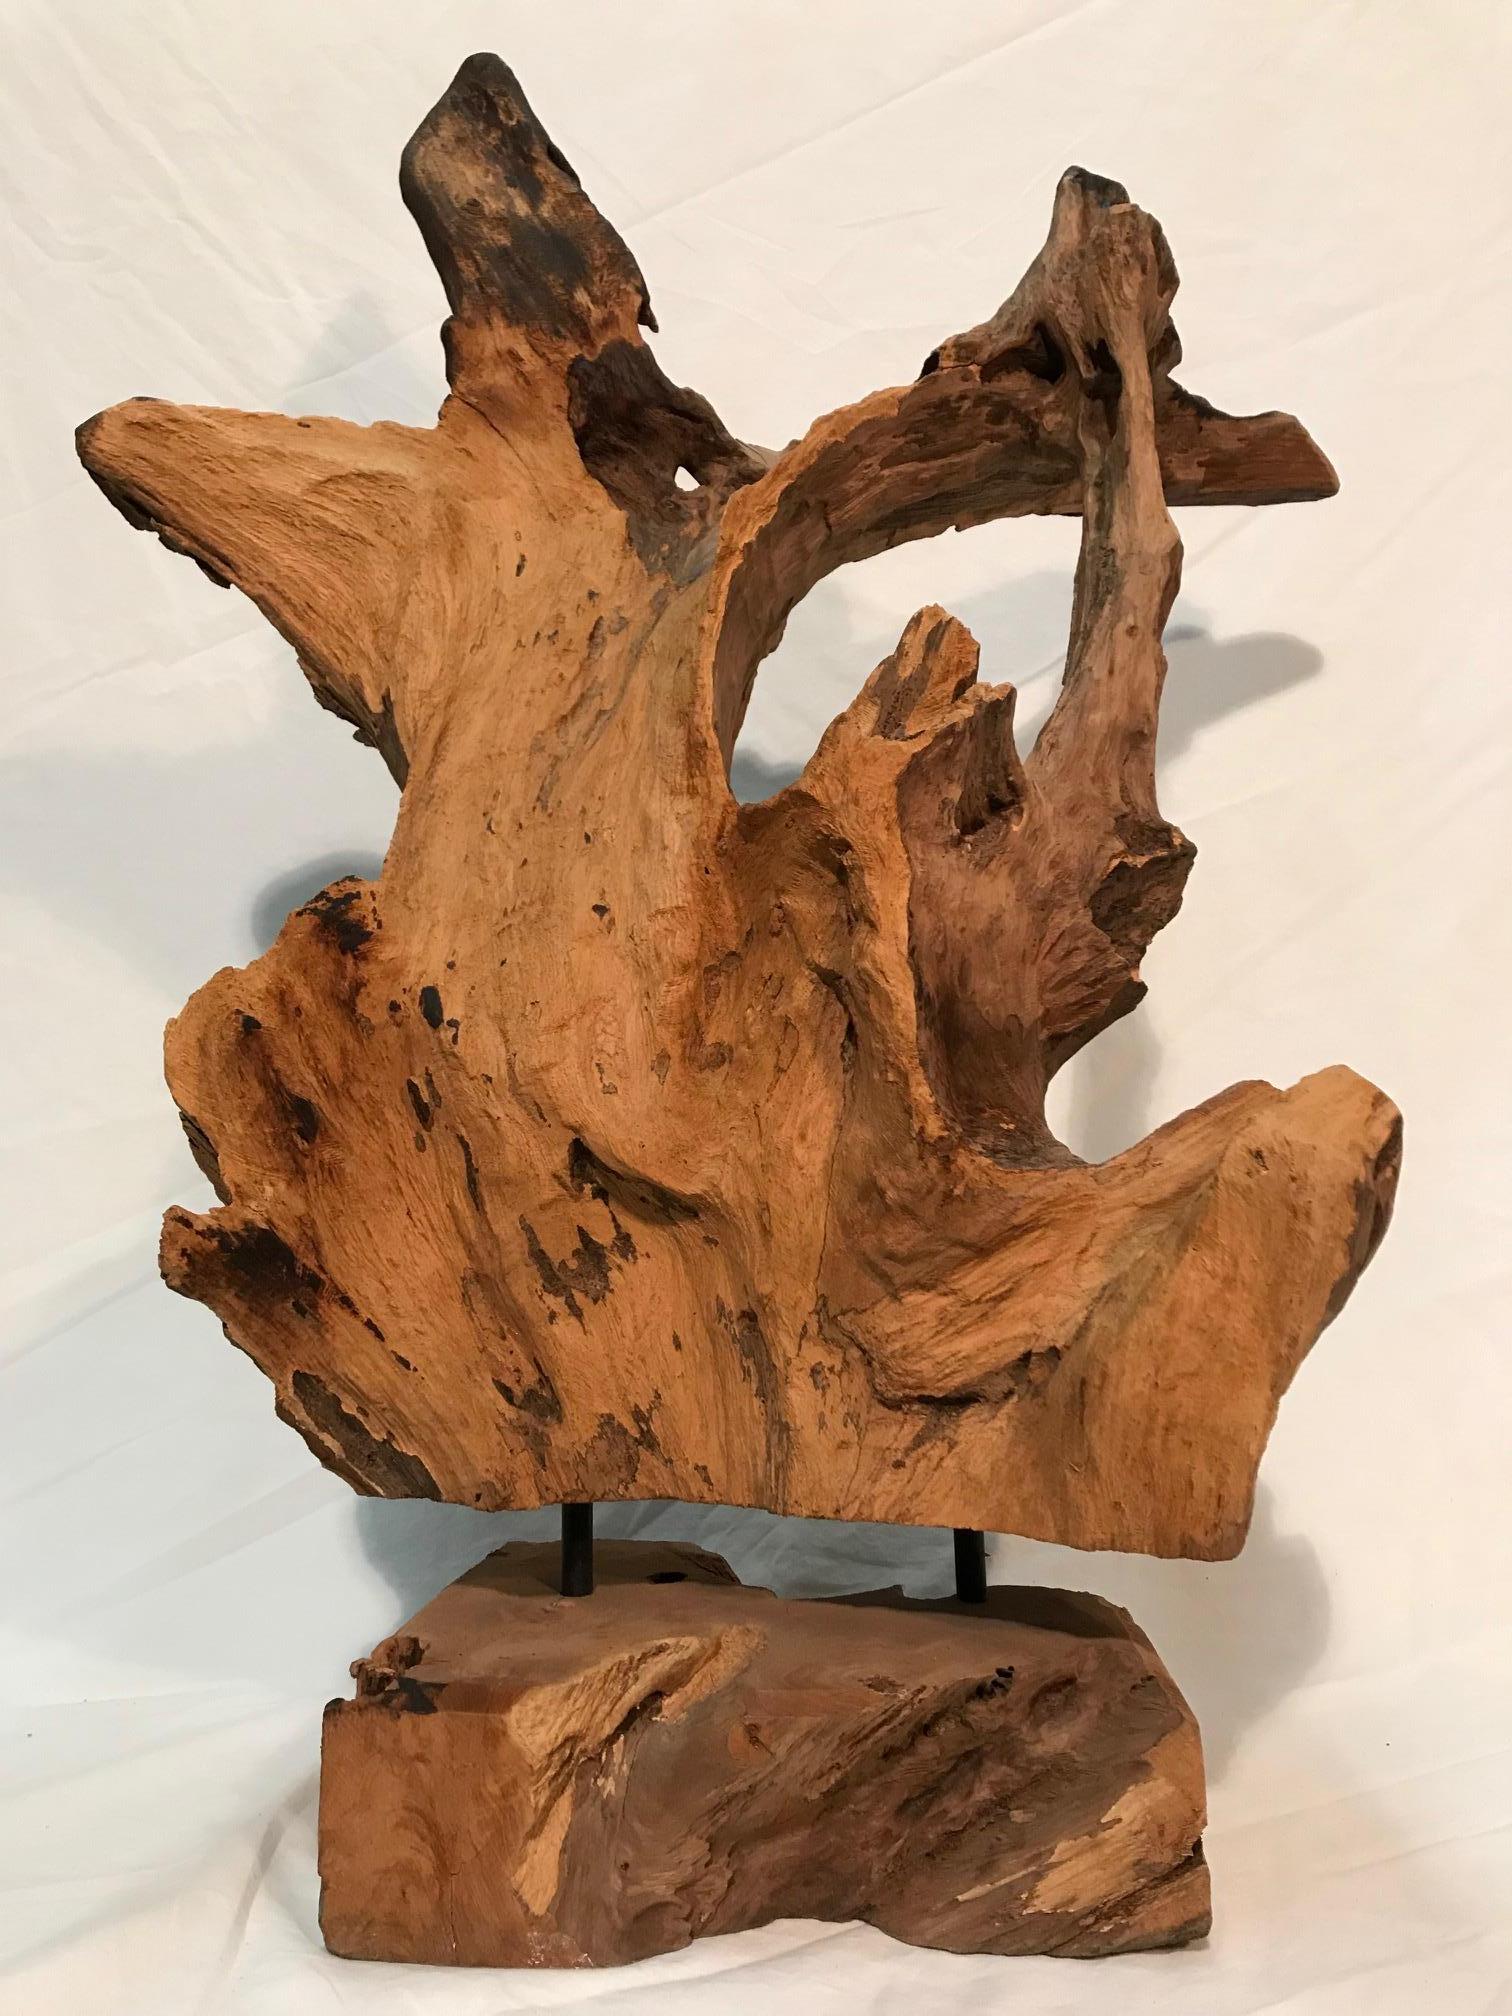 This pair adds interest and depth to any space. With their dynamic form that changes at every angle, these pieces can be seen from anywhere, from any perspective, and still be seen differently from onlooker to onlooker. Definitely a talking piece.